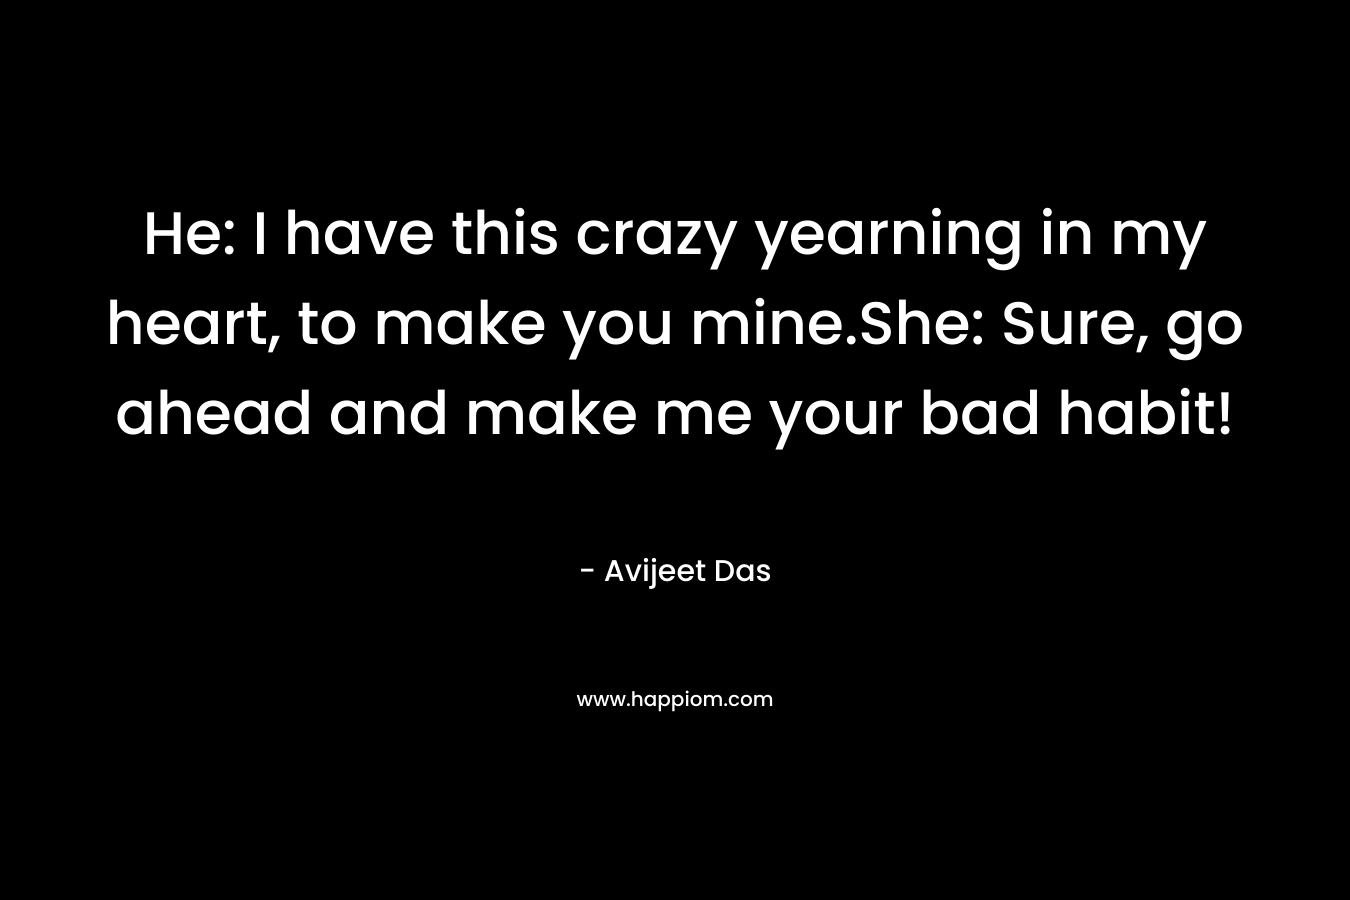 He: I have this crazy yearning in my heart, to make you mine.She: Sure, go ahead and make me your bad habit! – Avijeet Das